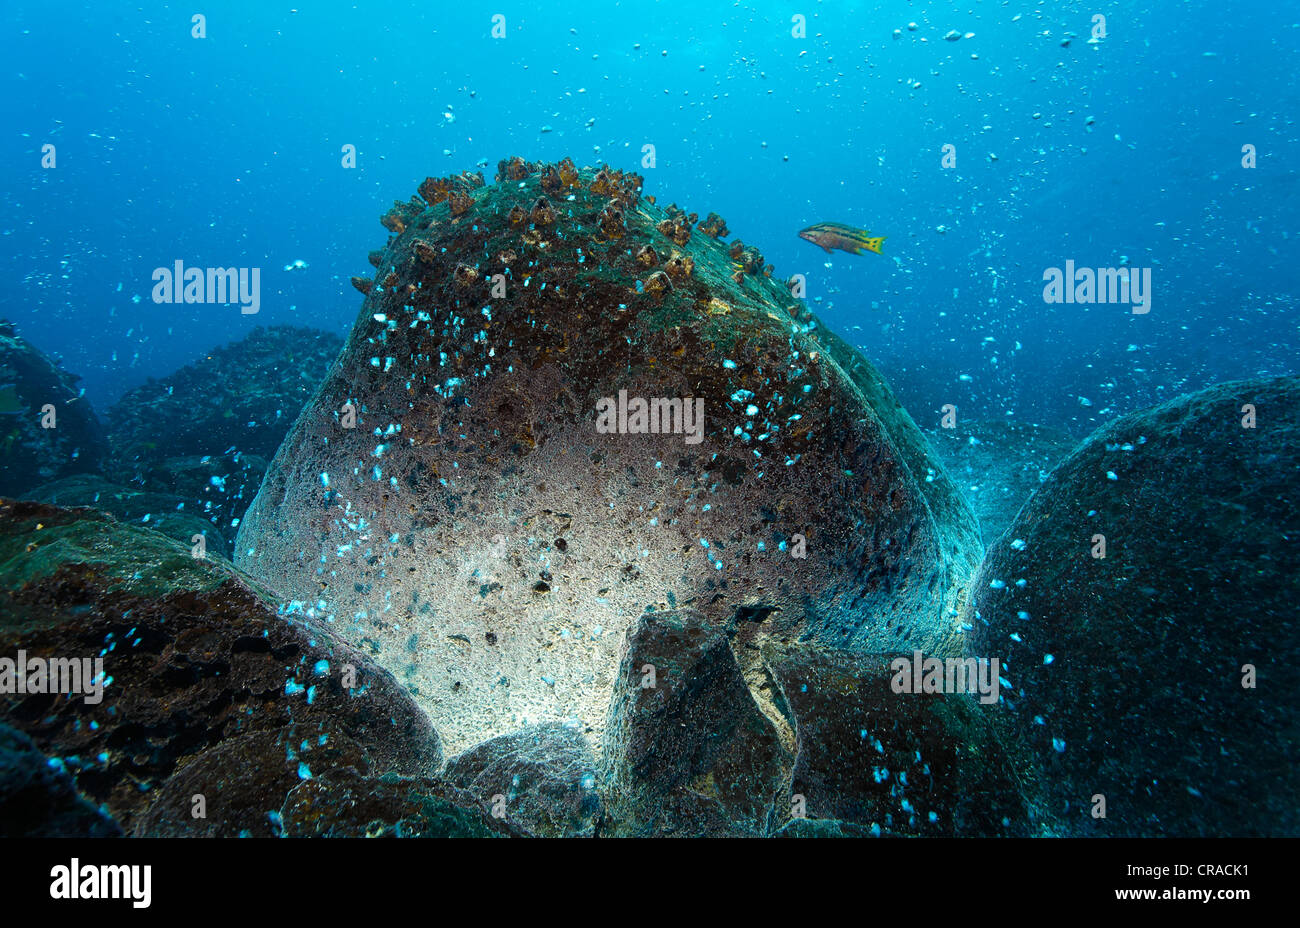 Rocks over a volcanic hot spot, white mineral deposits, hot springs, gas bubbles, overgrown, barnacles (Balanidae), Mexican Stock Photo